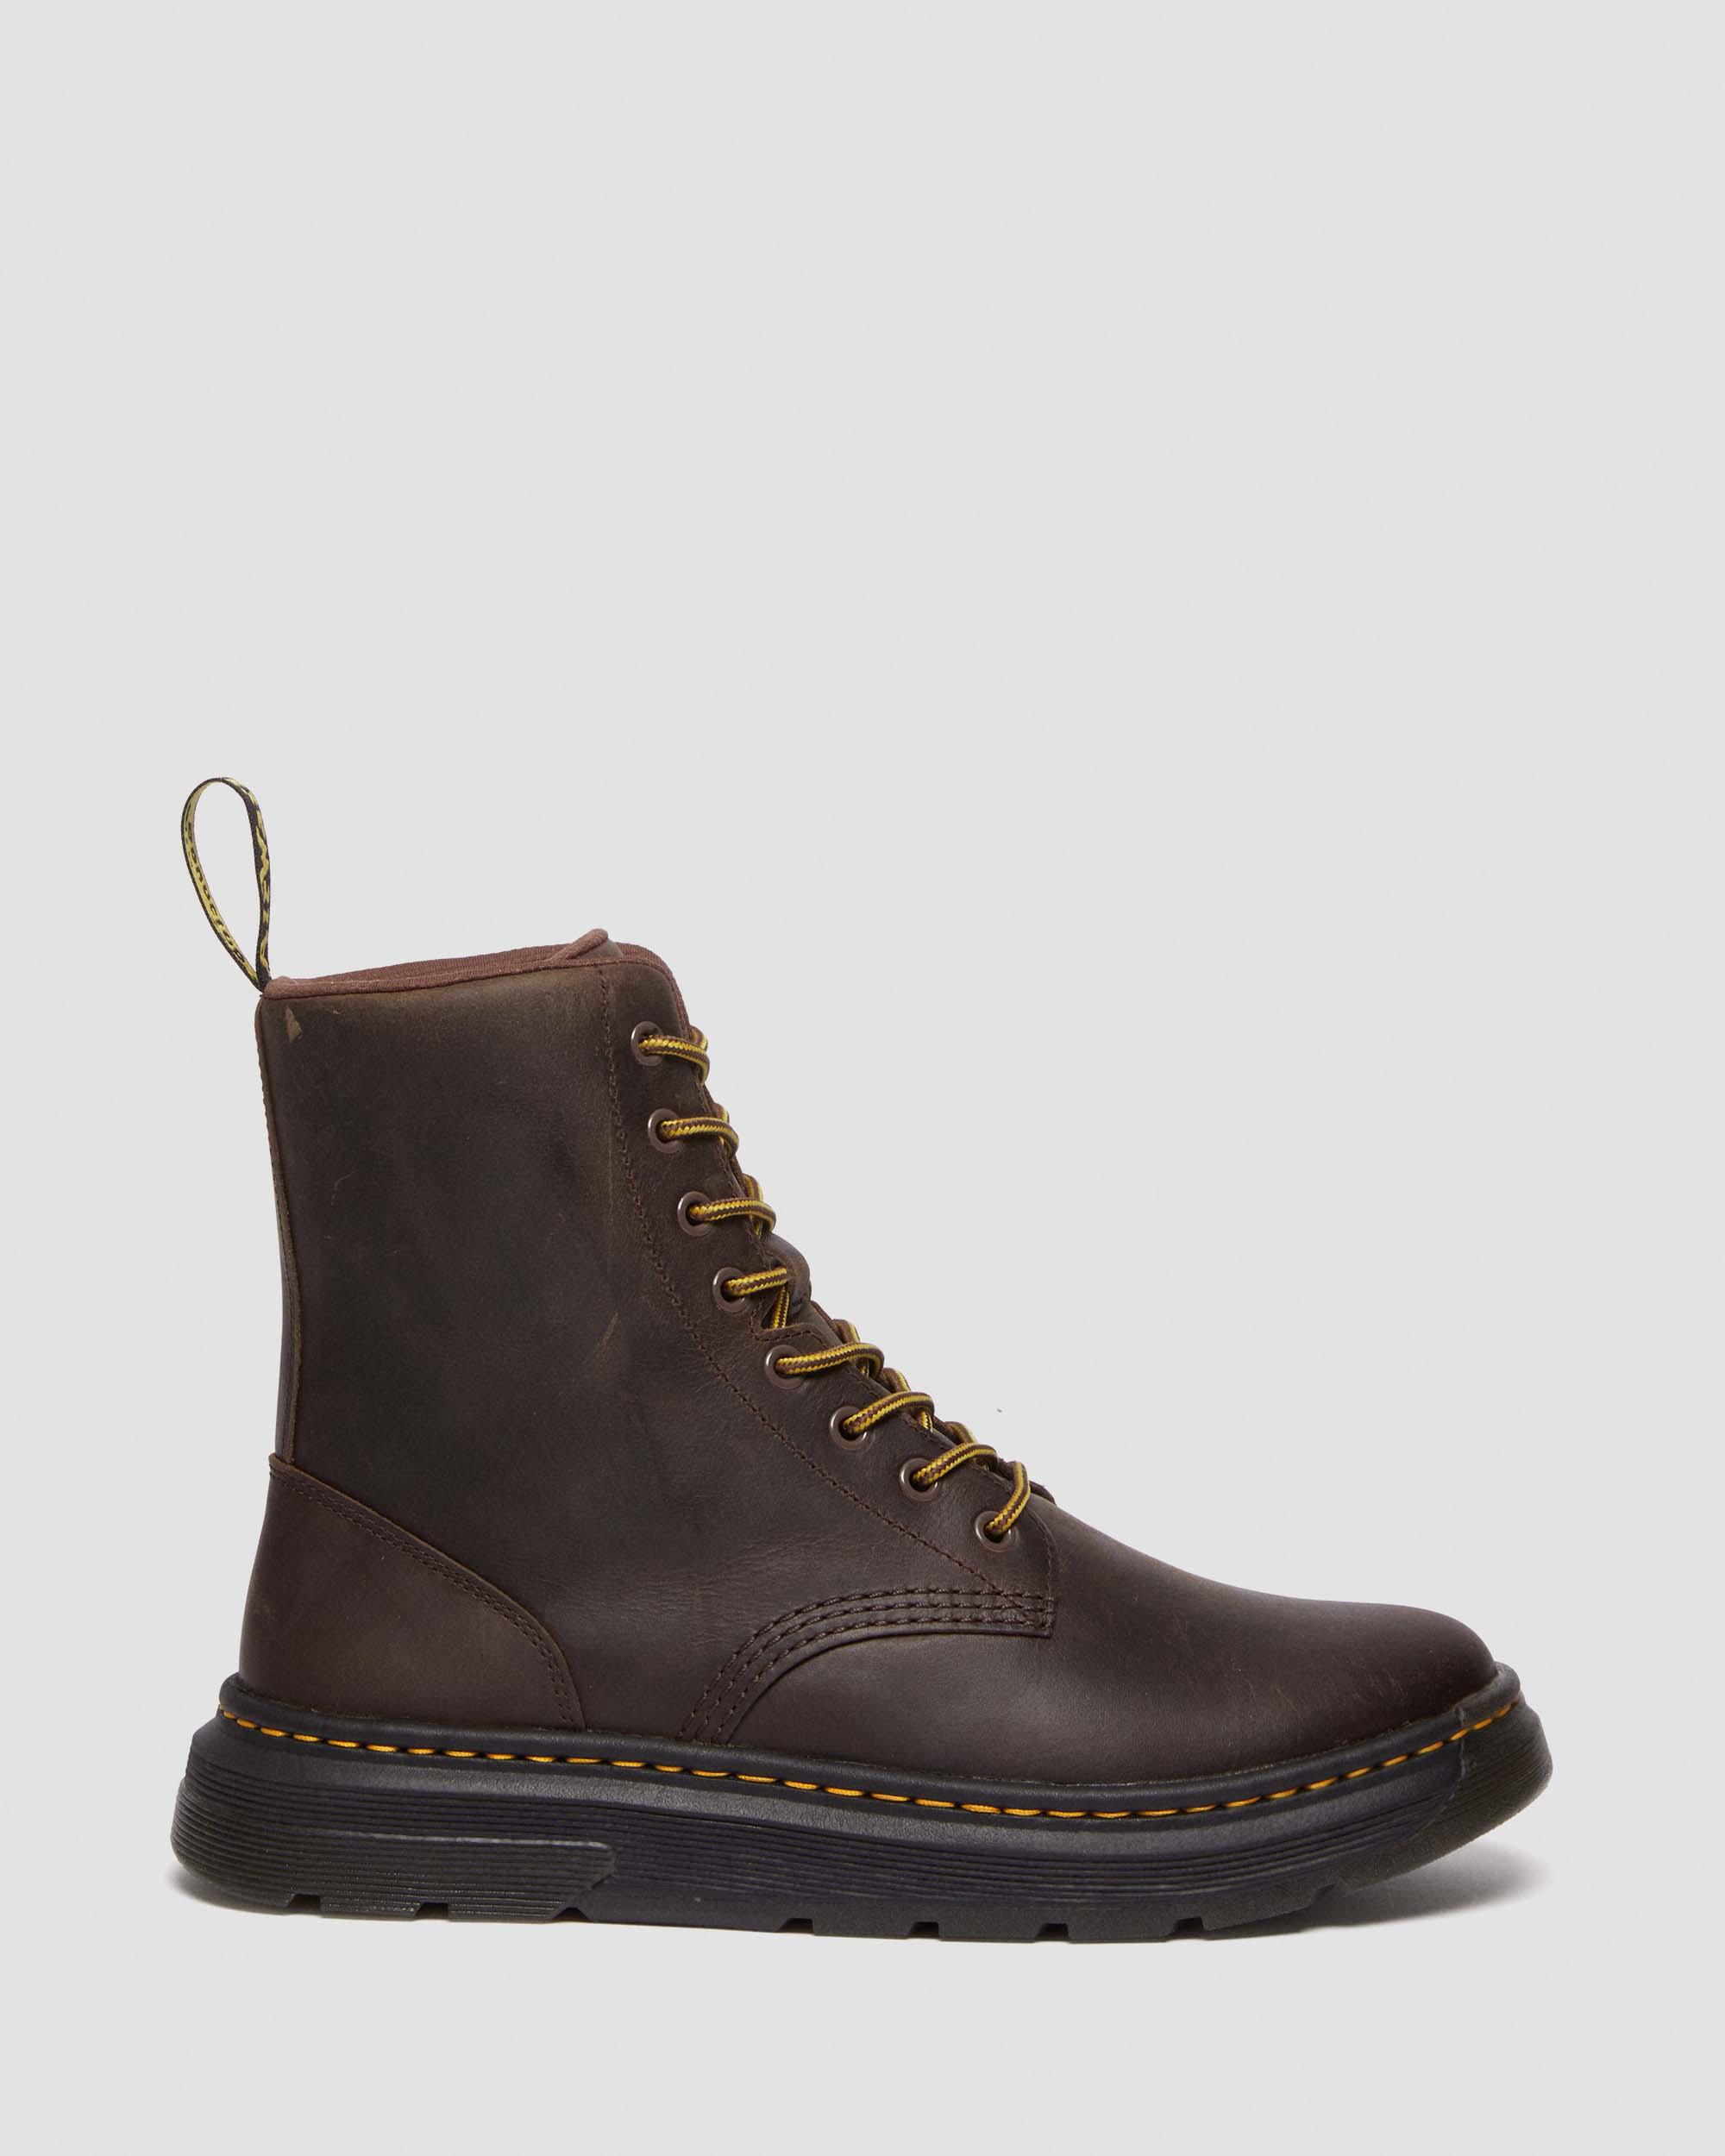 Crewson Leather Lace Up Boots in Dark Brown